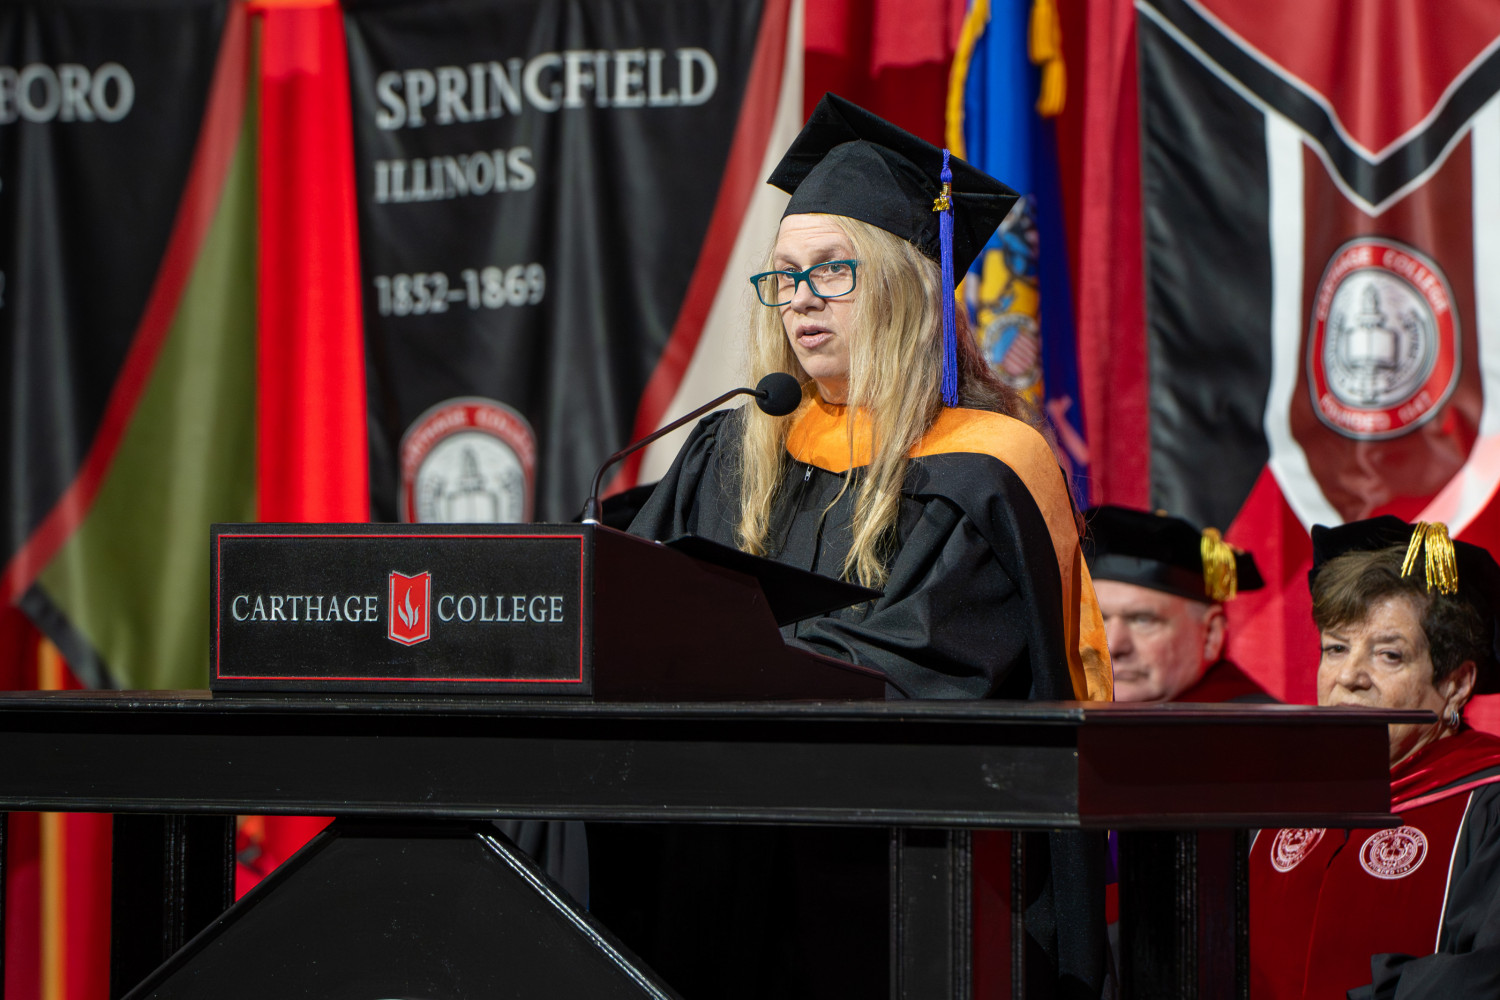 Faculty speaker, Becky Swambar, speaking at the Commencement Ceremony.